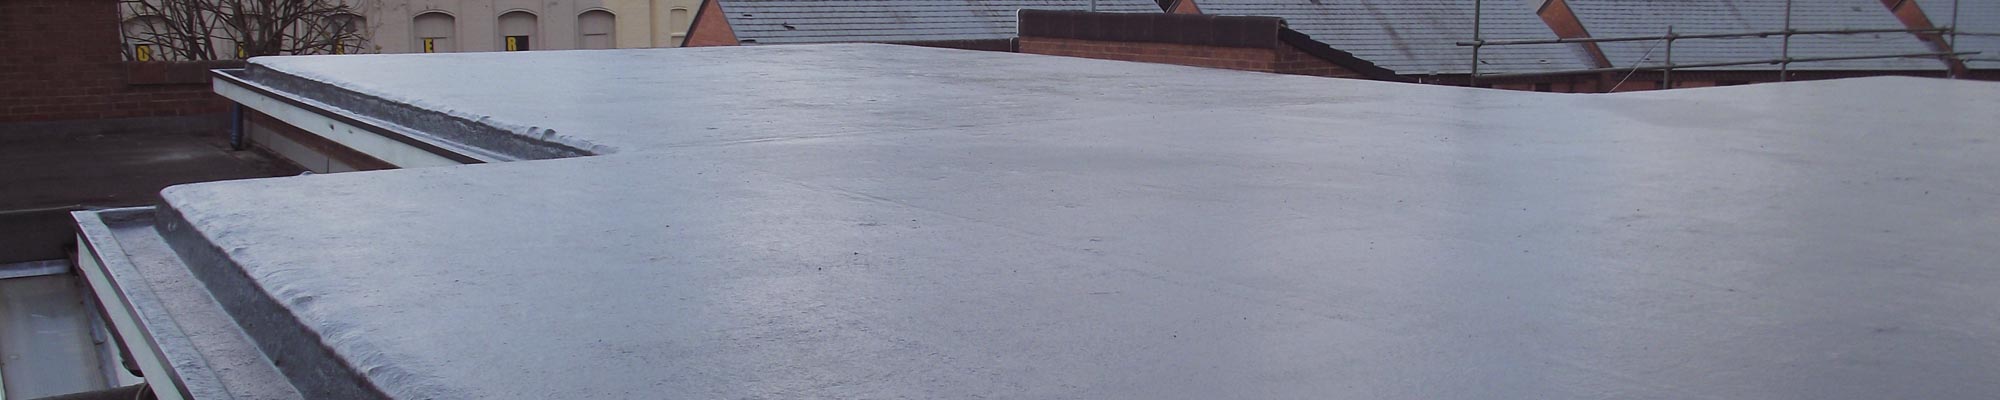 Domestic and commercial flat roofing services from Proctor Roofing